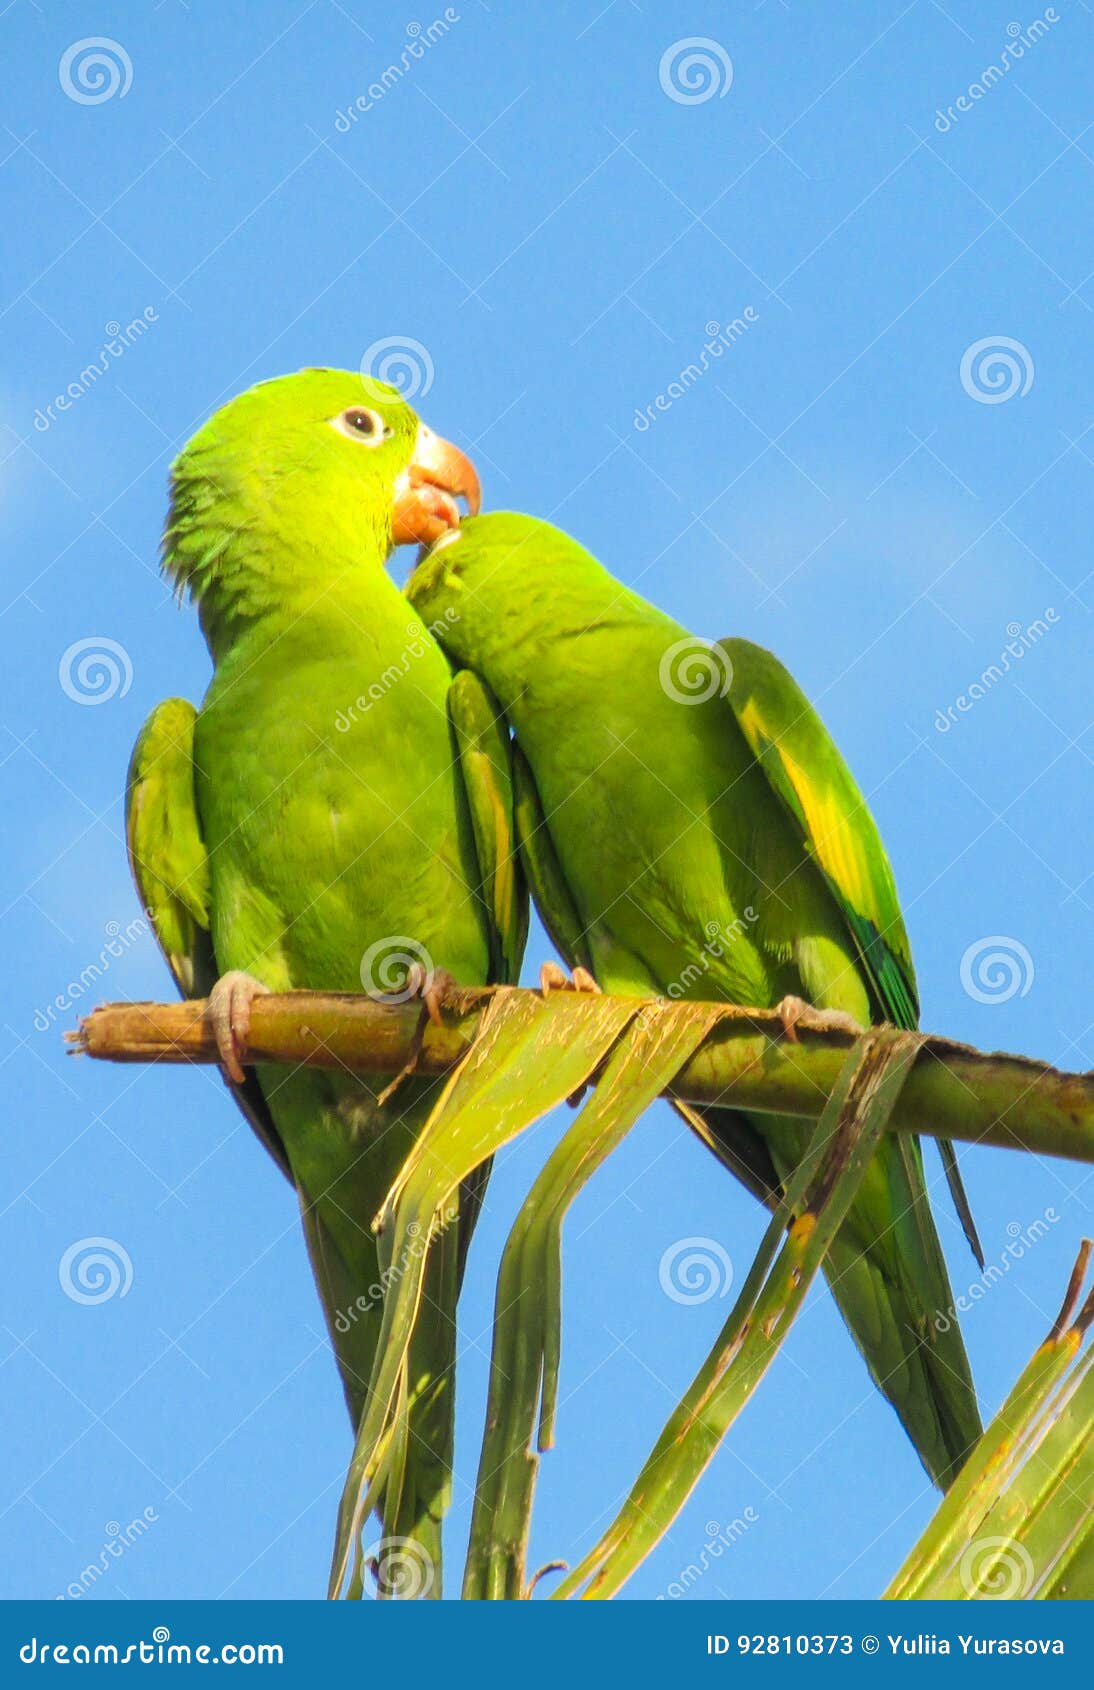 Two Small Green Parrots in Love Stock Image - Image of colourful ...